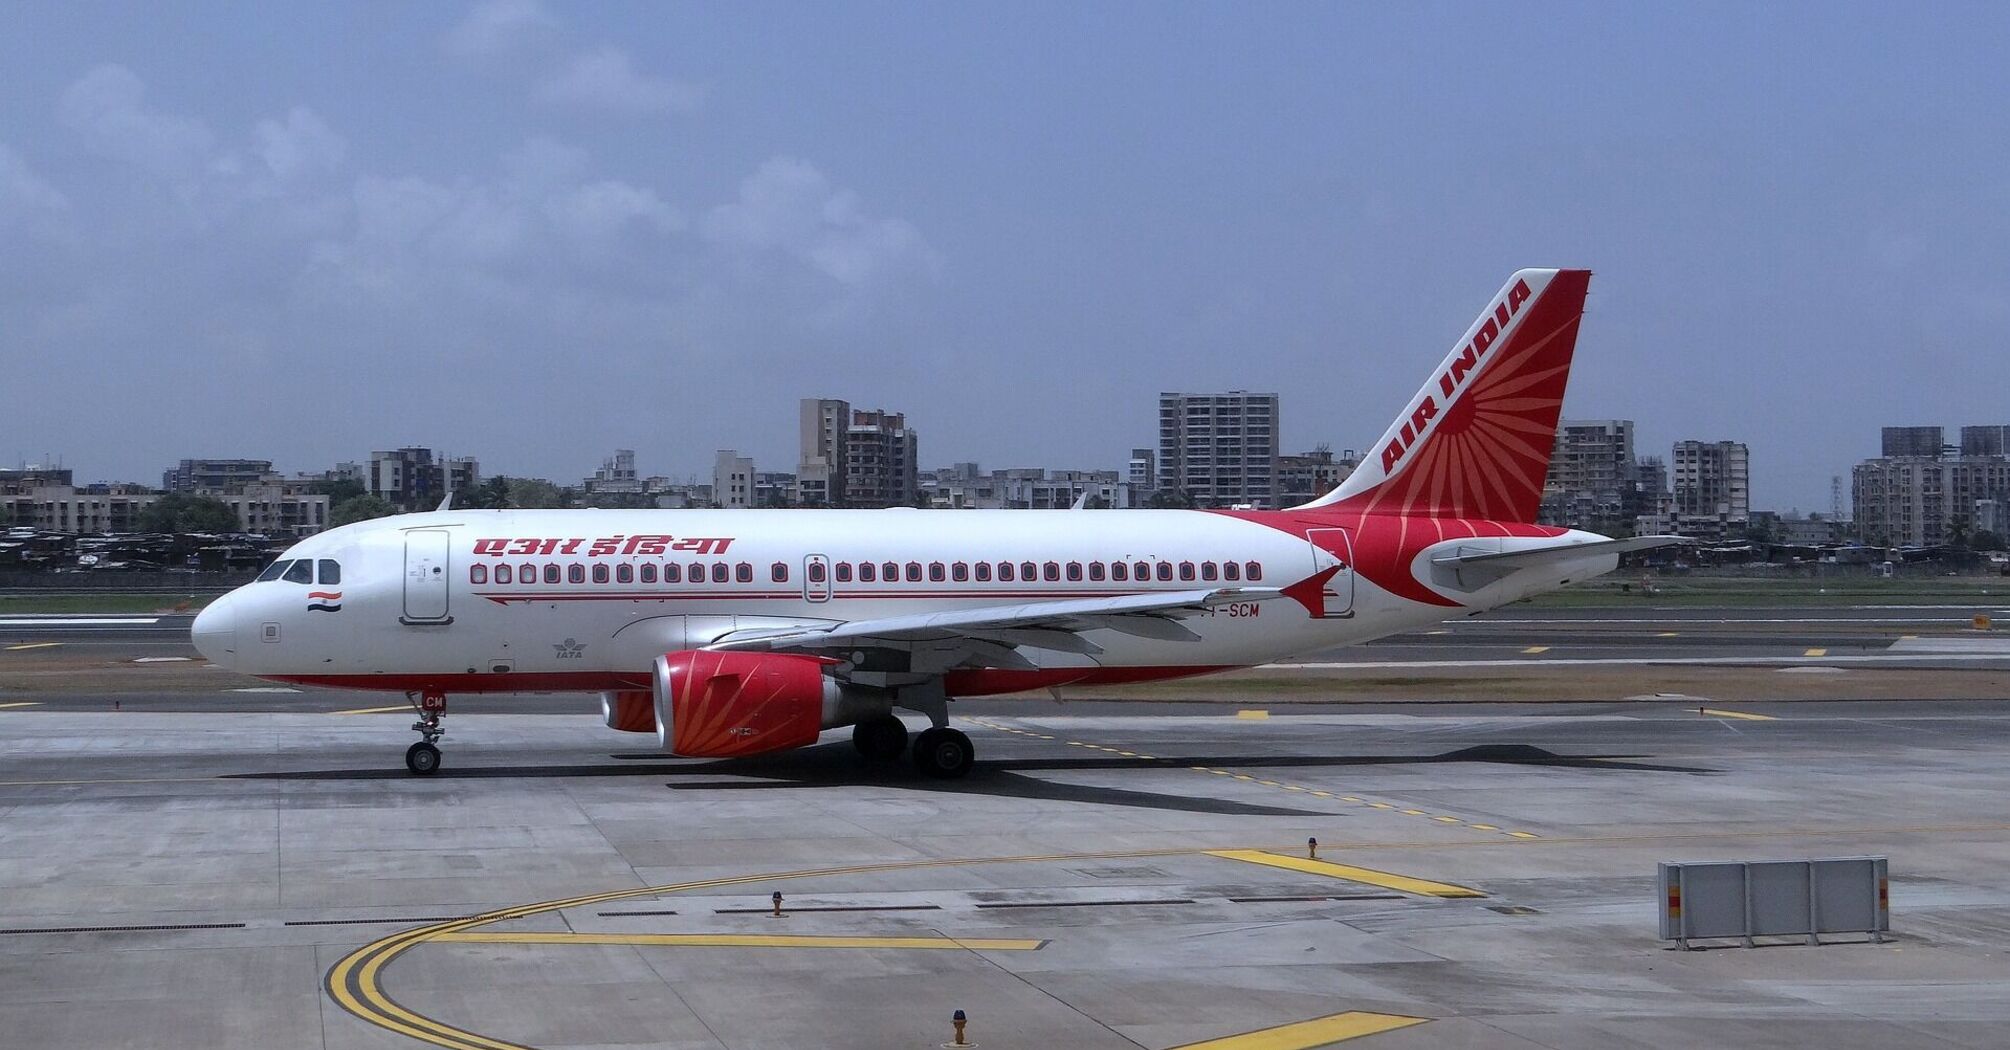 An Air India aircraft parked on the tarmac at an airport